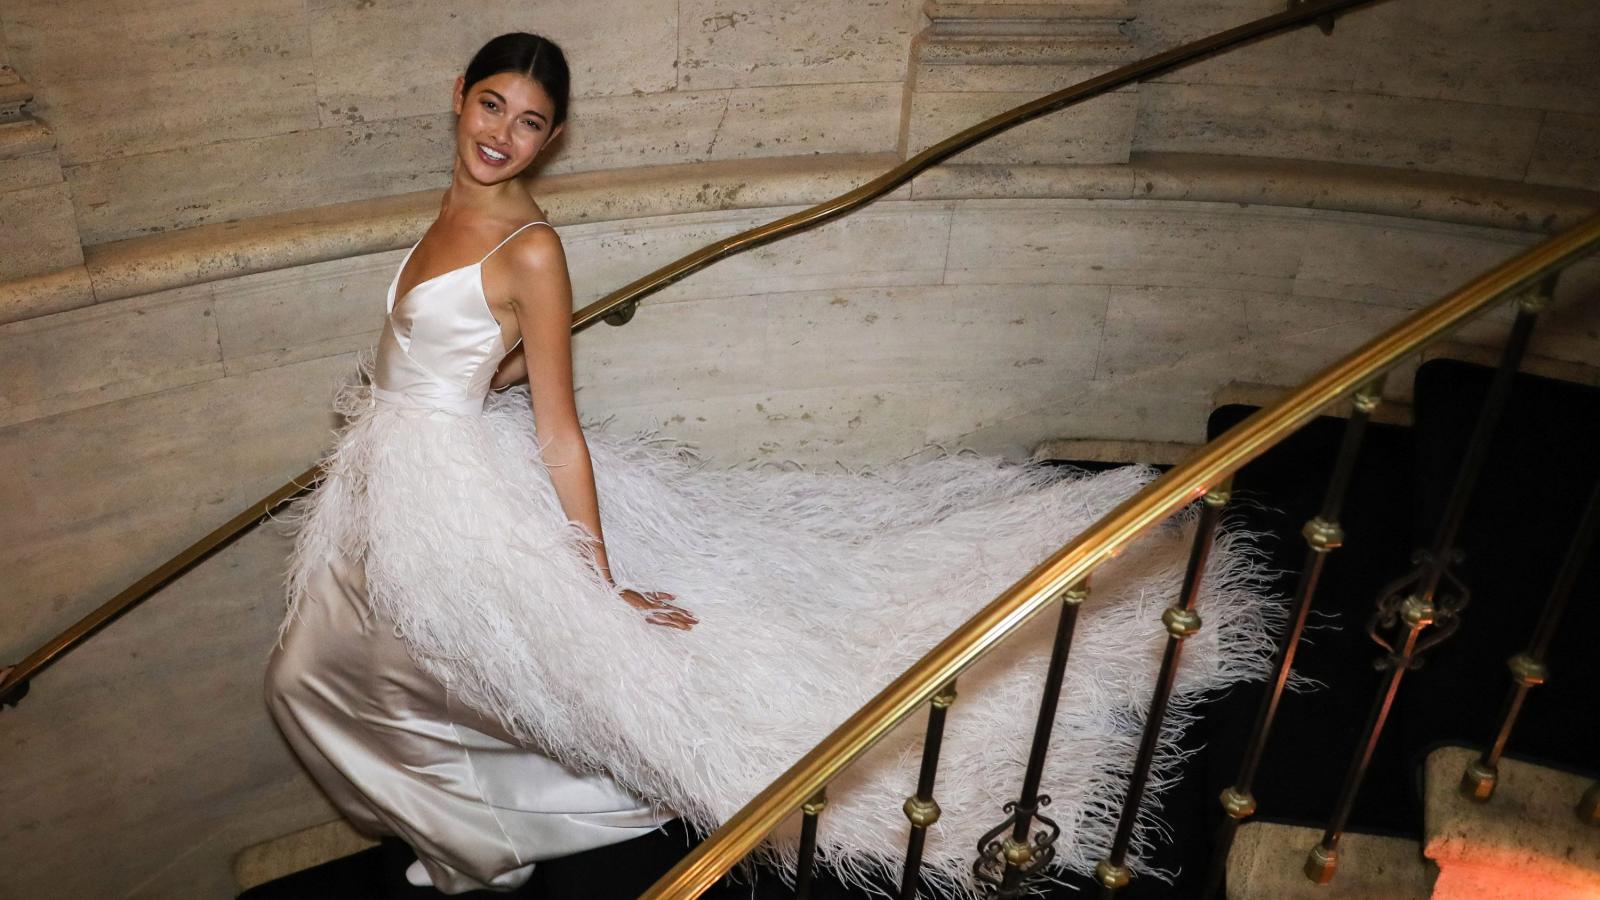 How to get a designer wedding dress fast without going broke